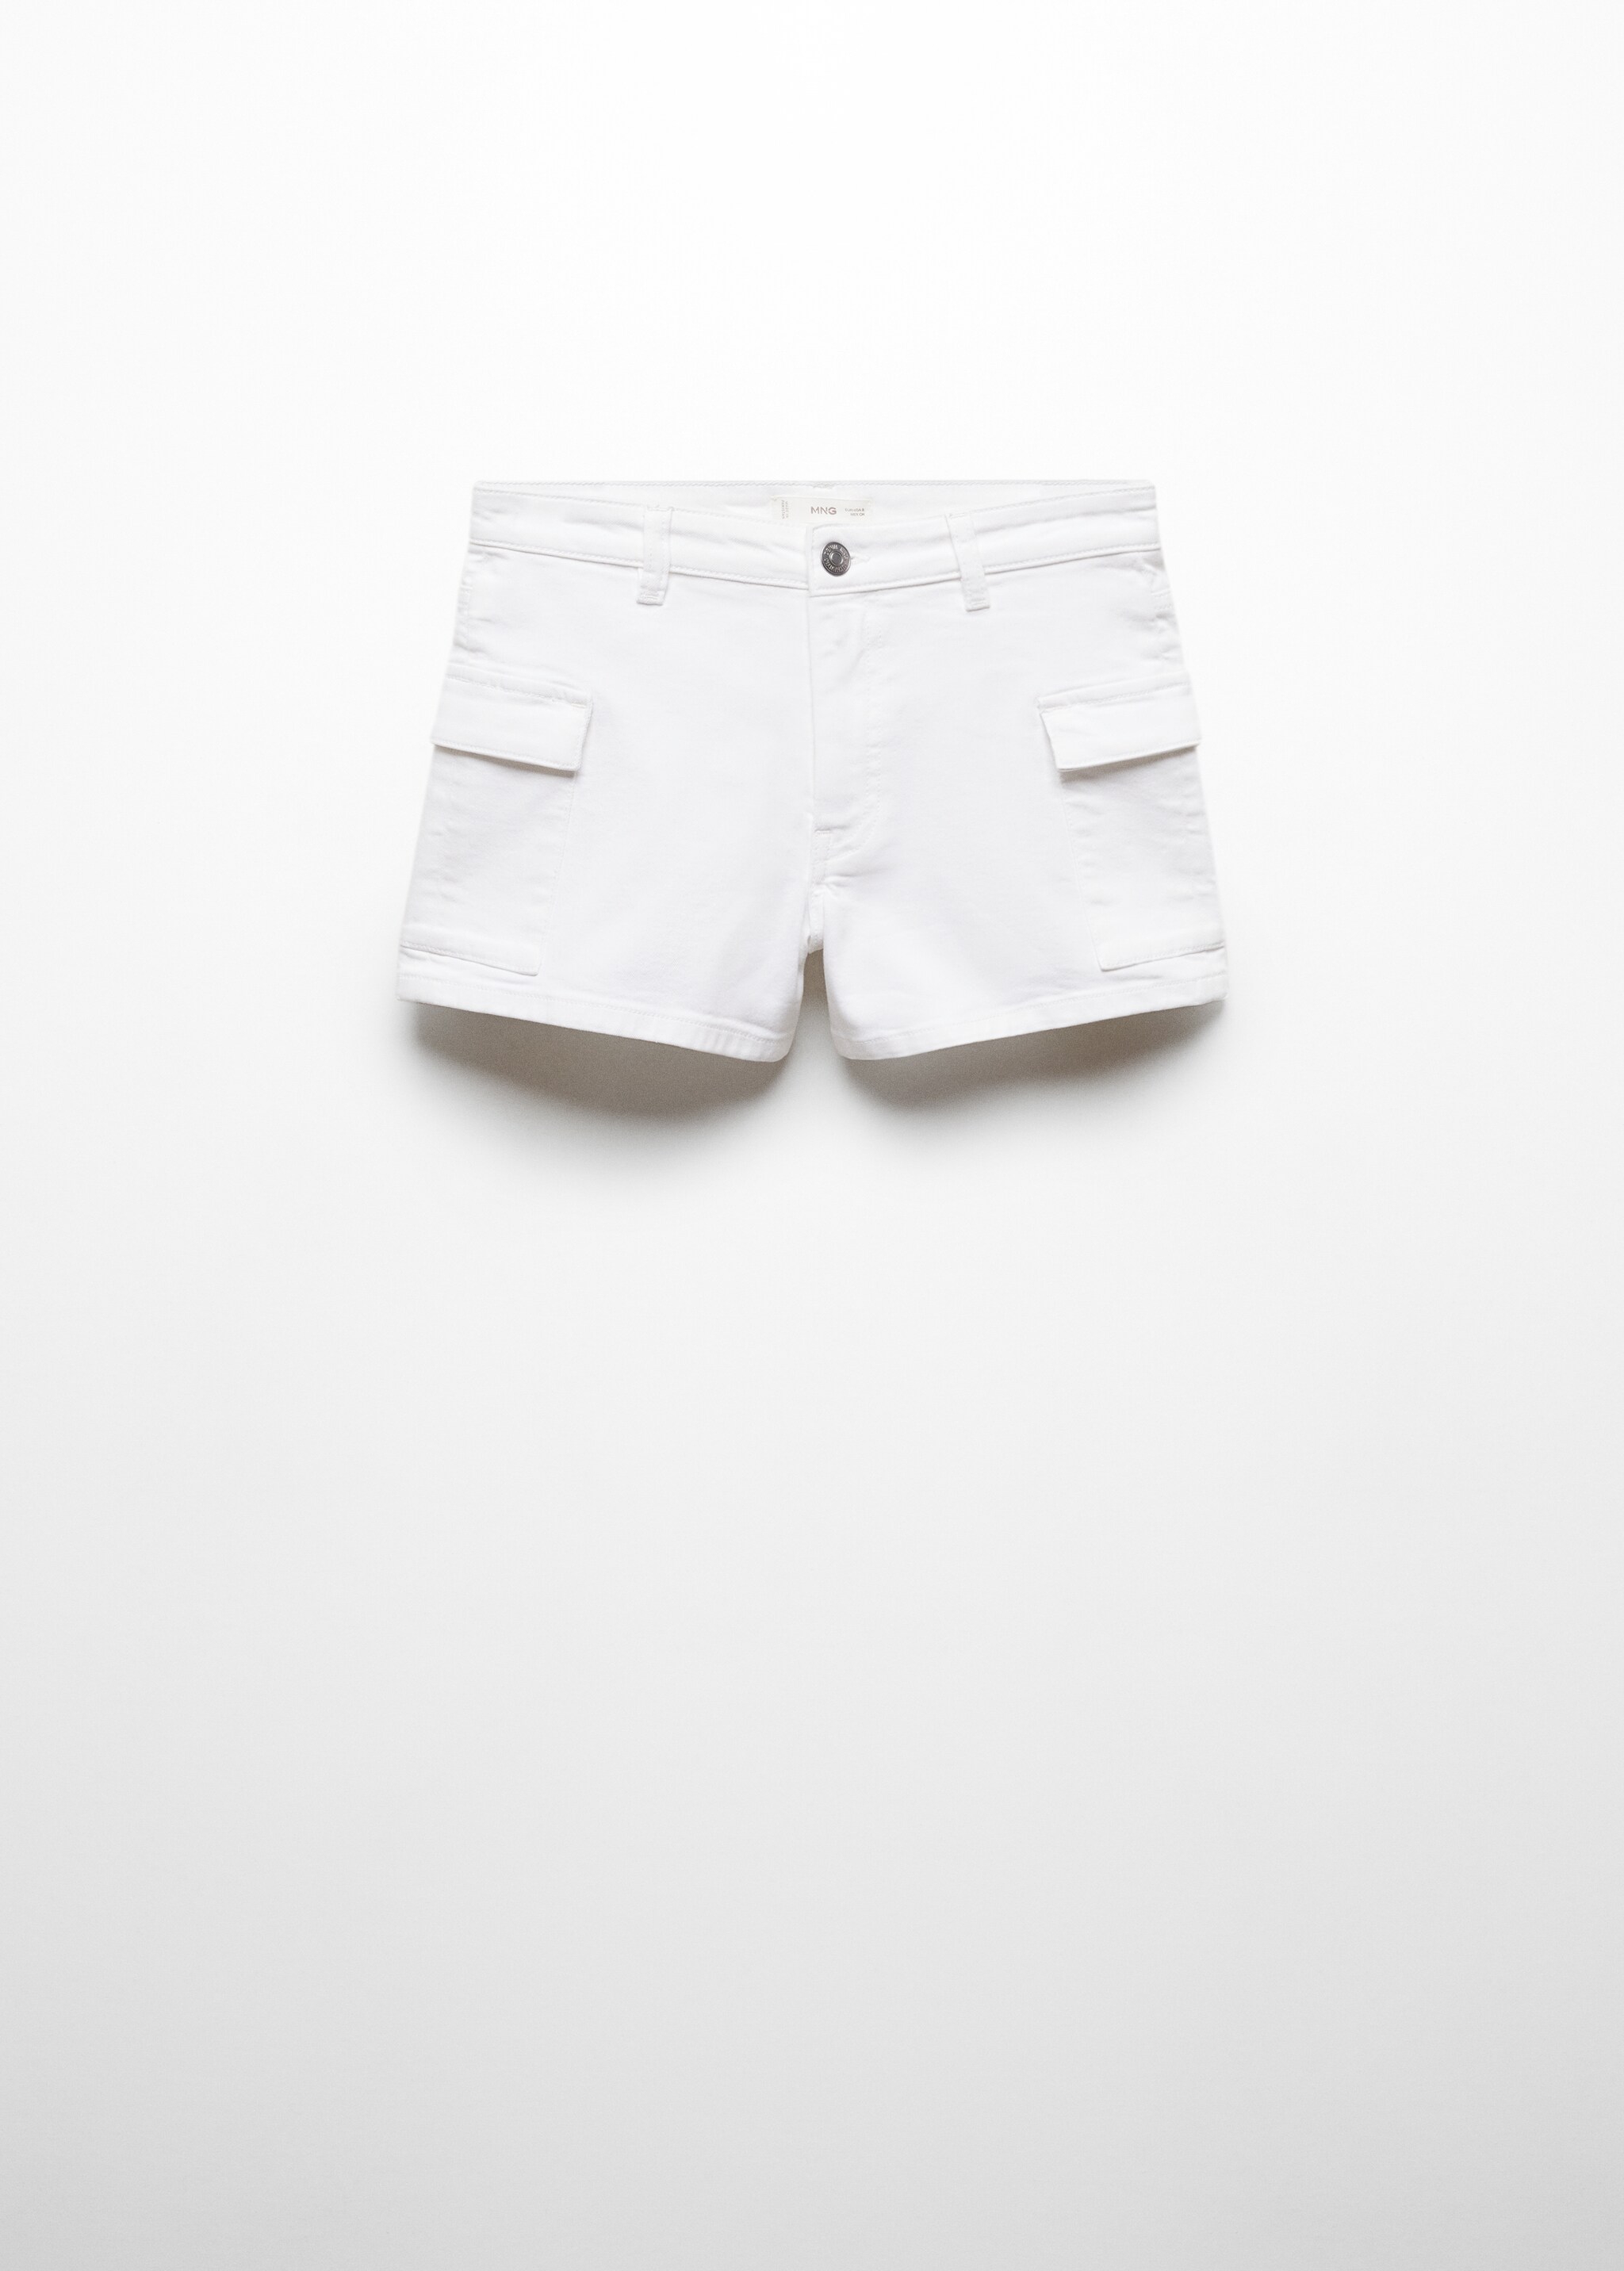 Cotton cargo shorts - Article without model